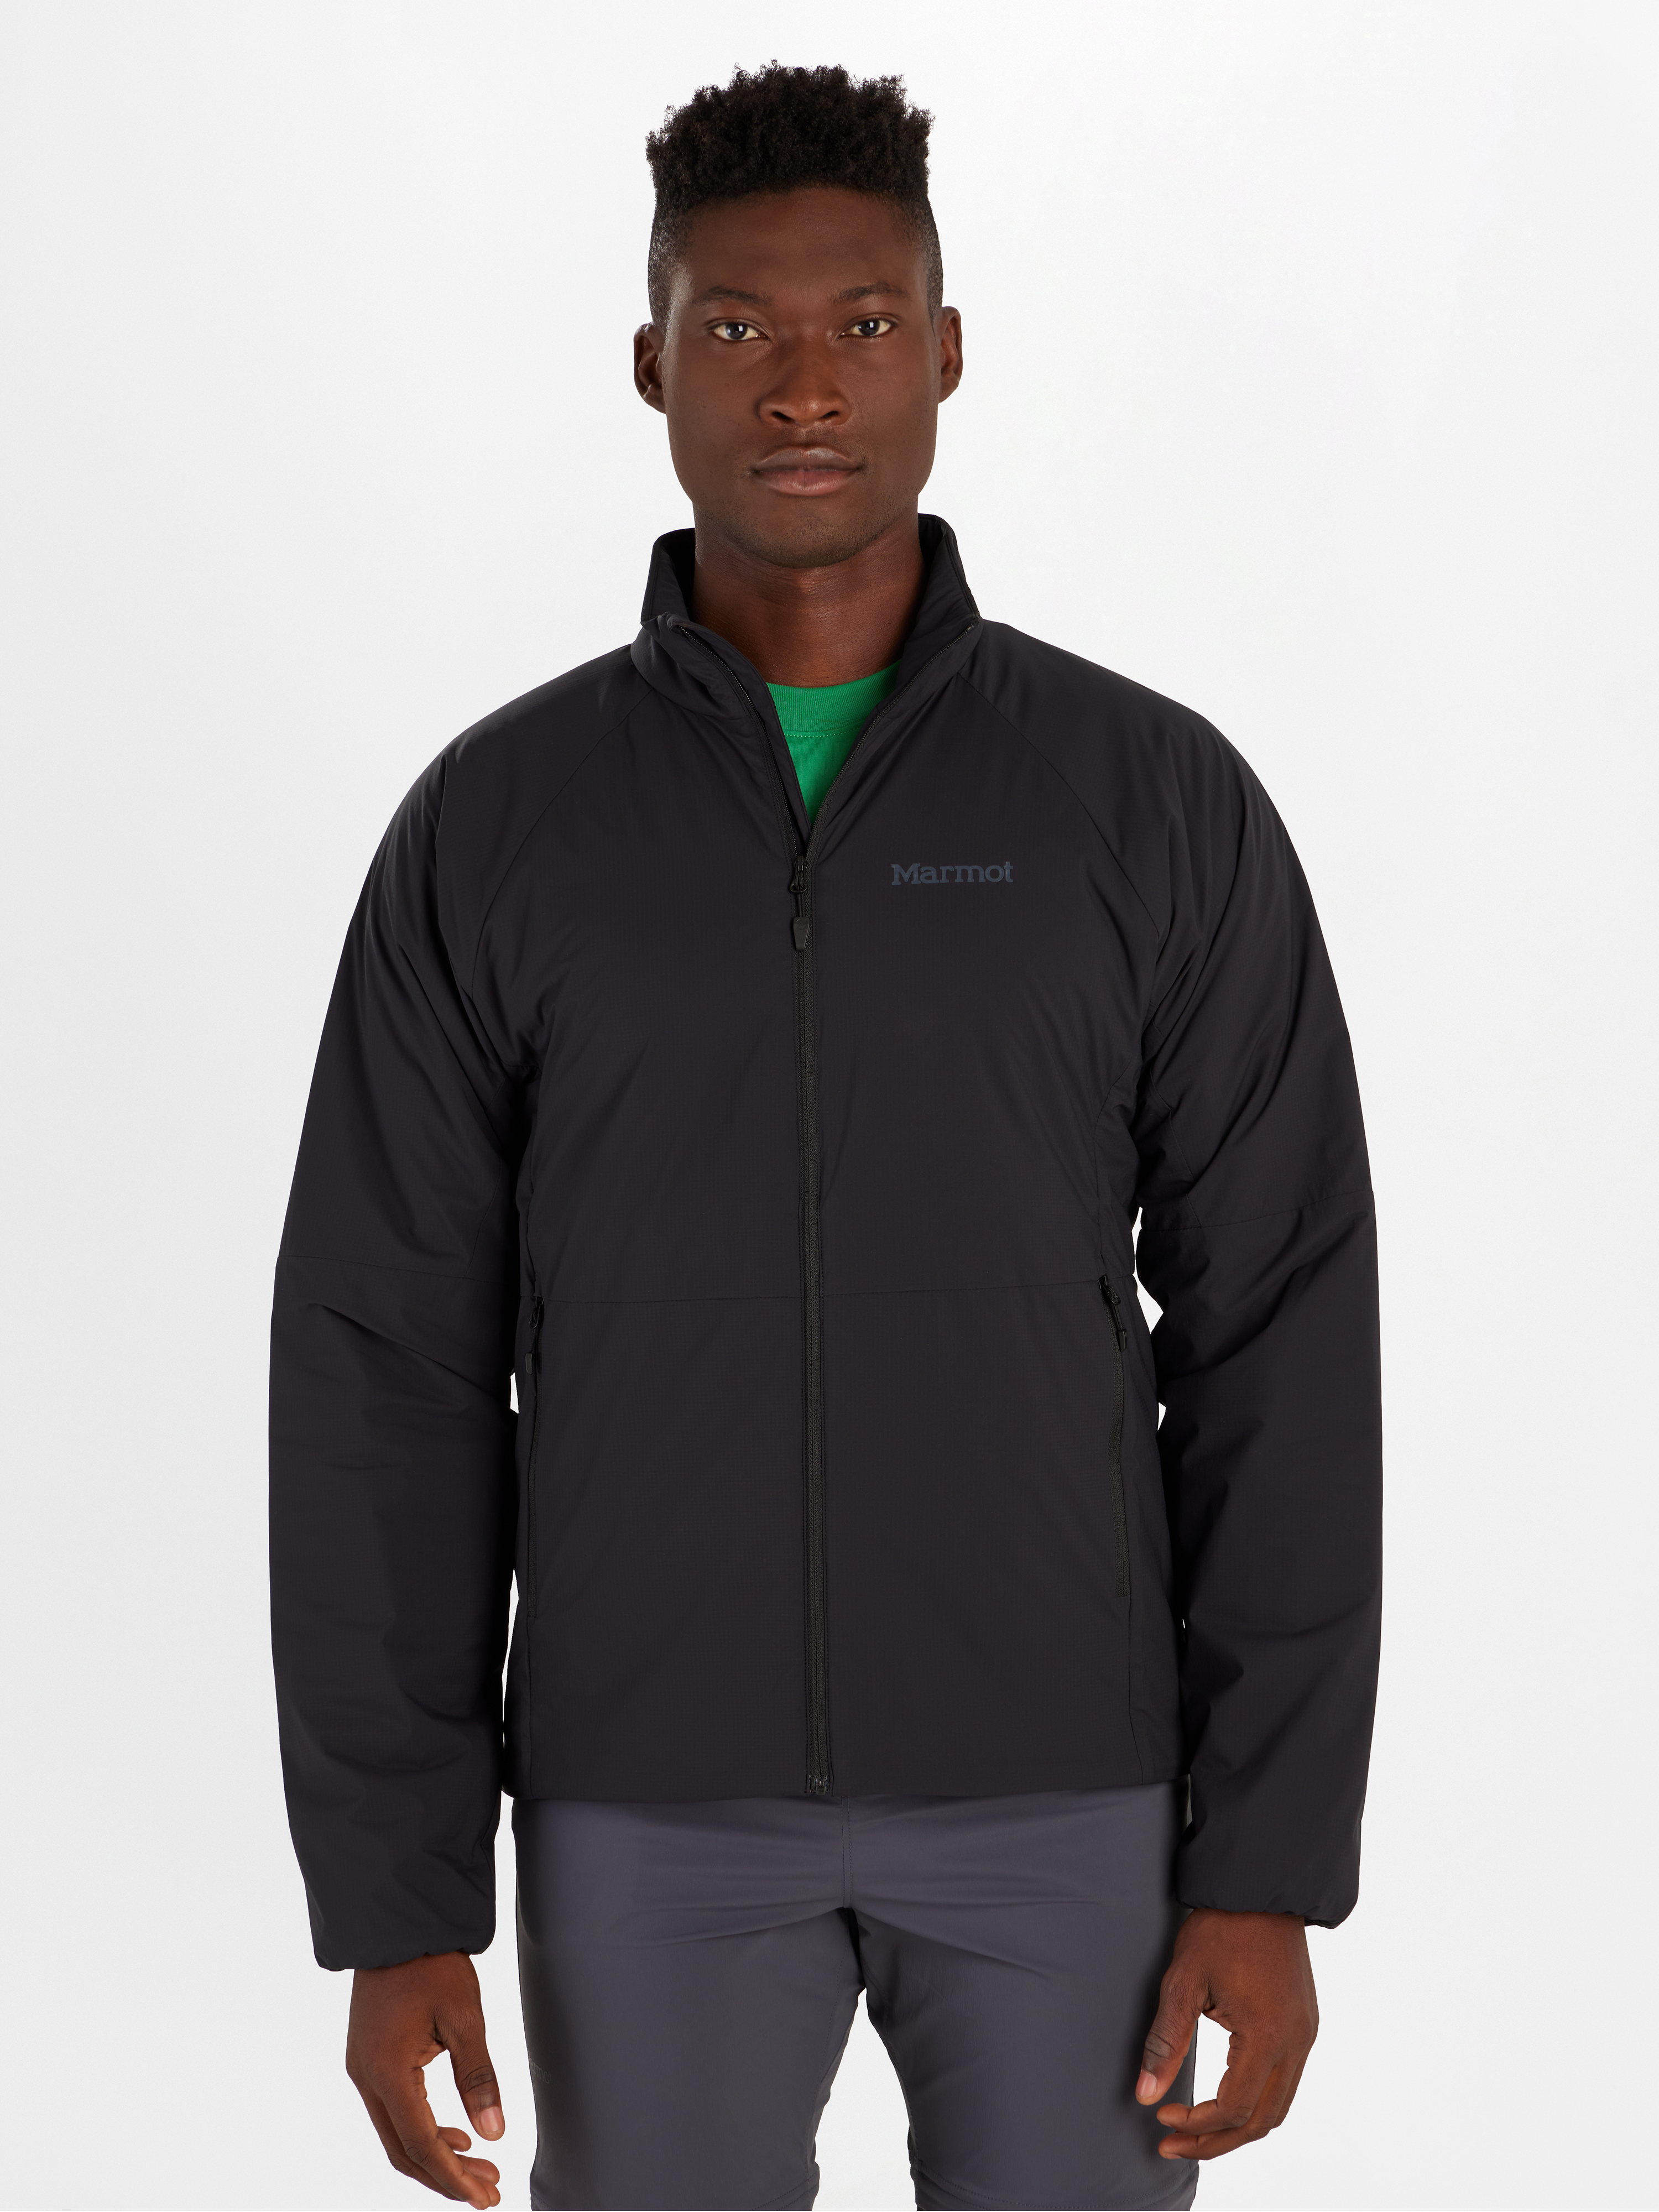 Men's Insulated & Down Jackets | Marmot